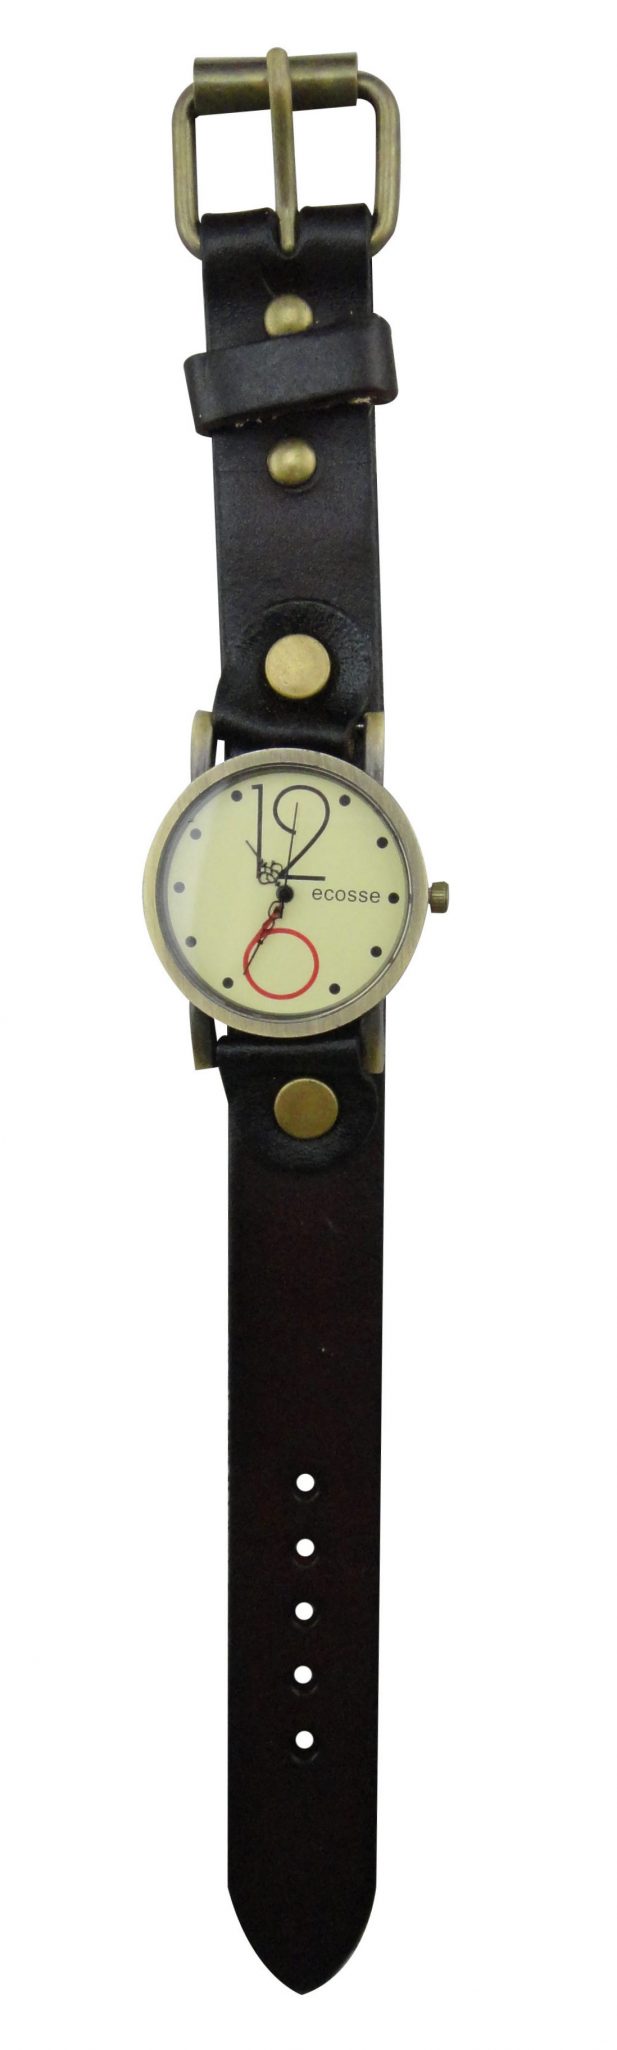 Watch with Strap Detail